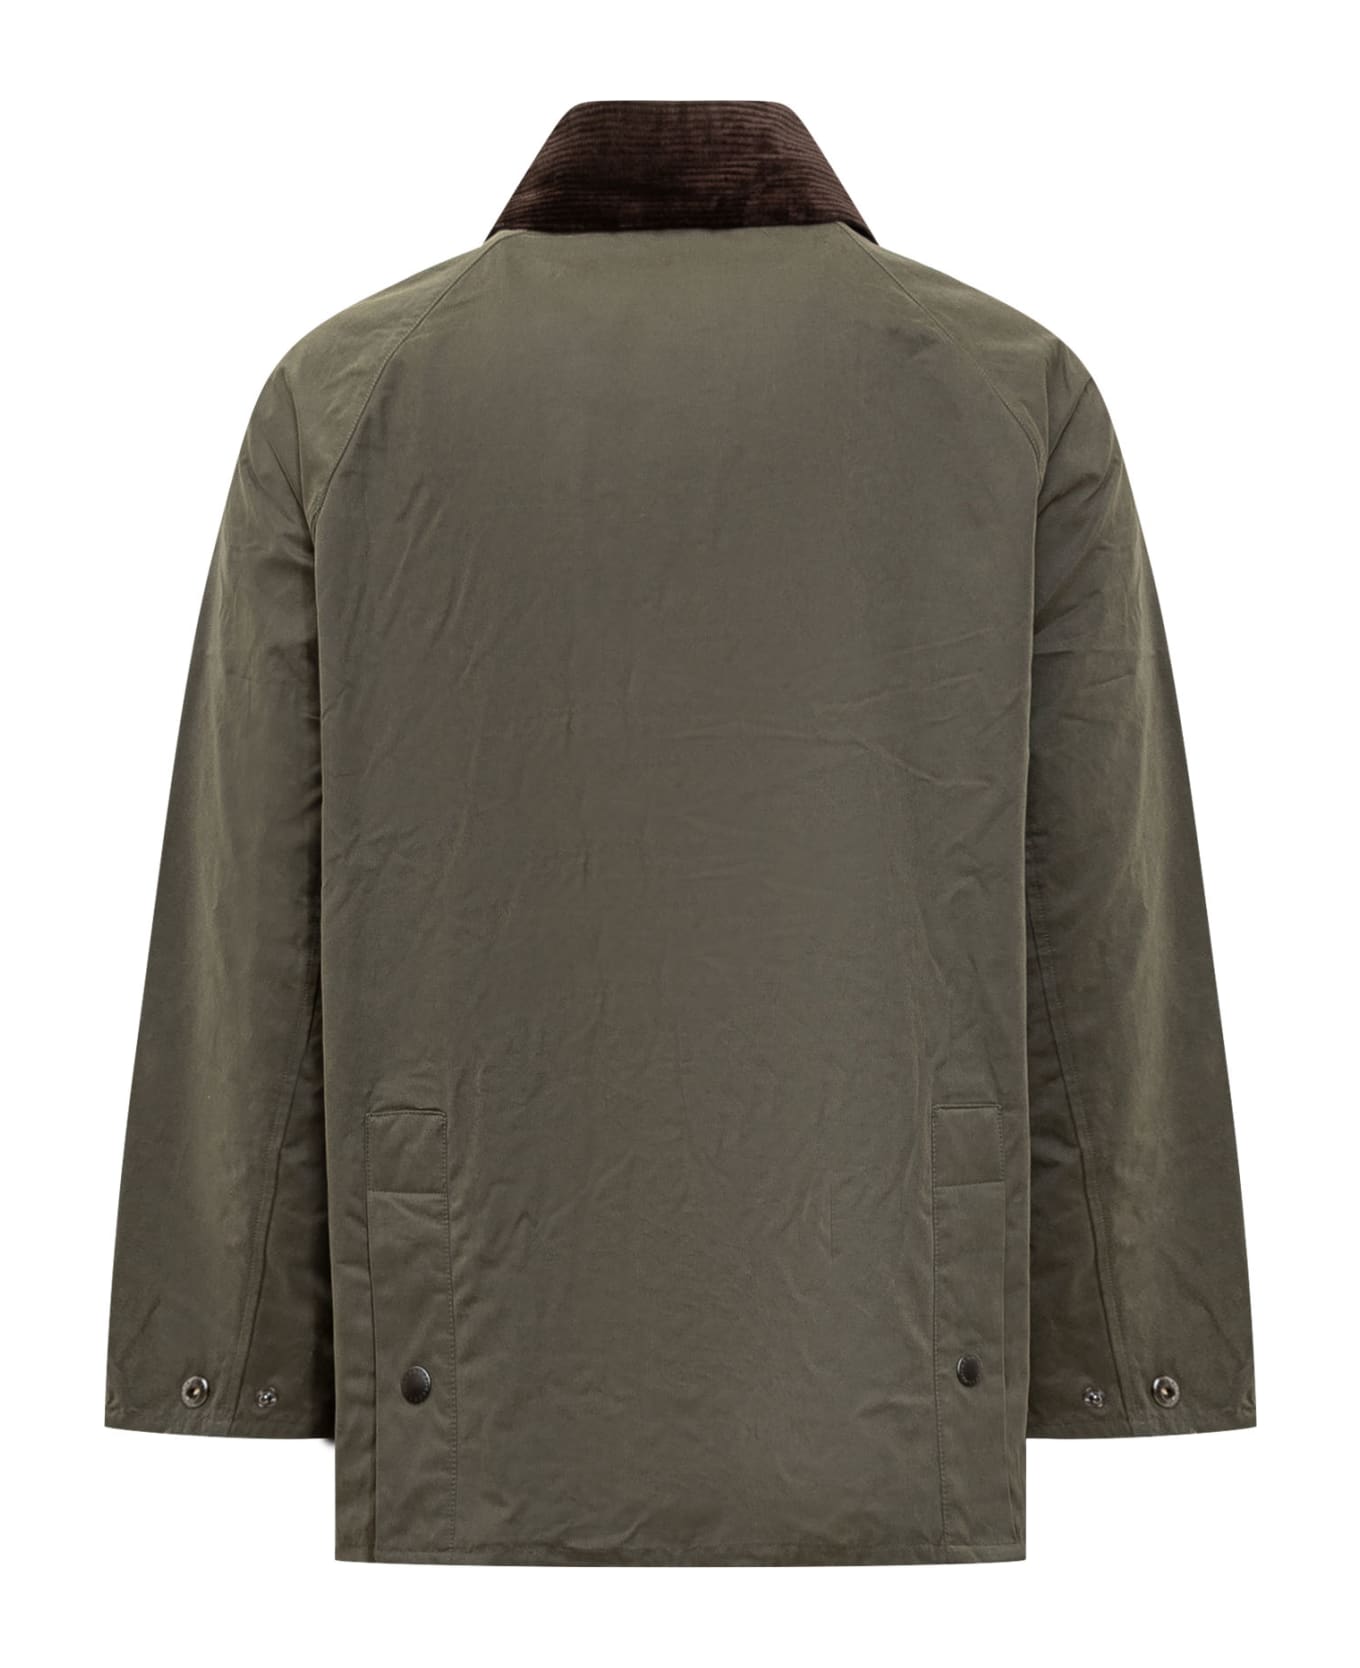 Barbour Oversize Peached Bedale Casual Jacket - SAGE ジャケット